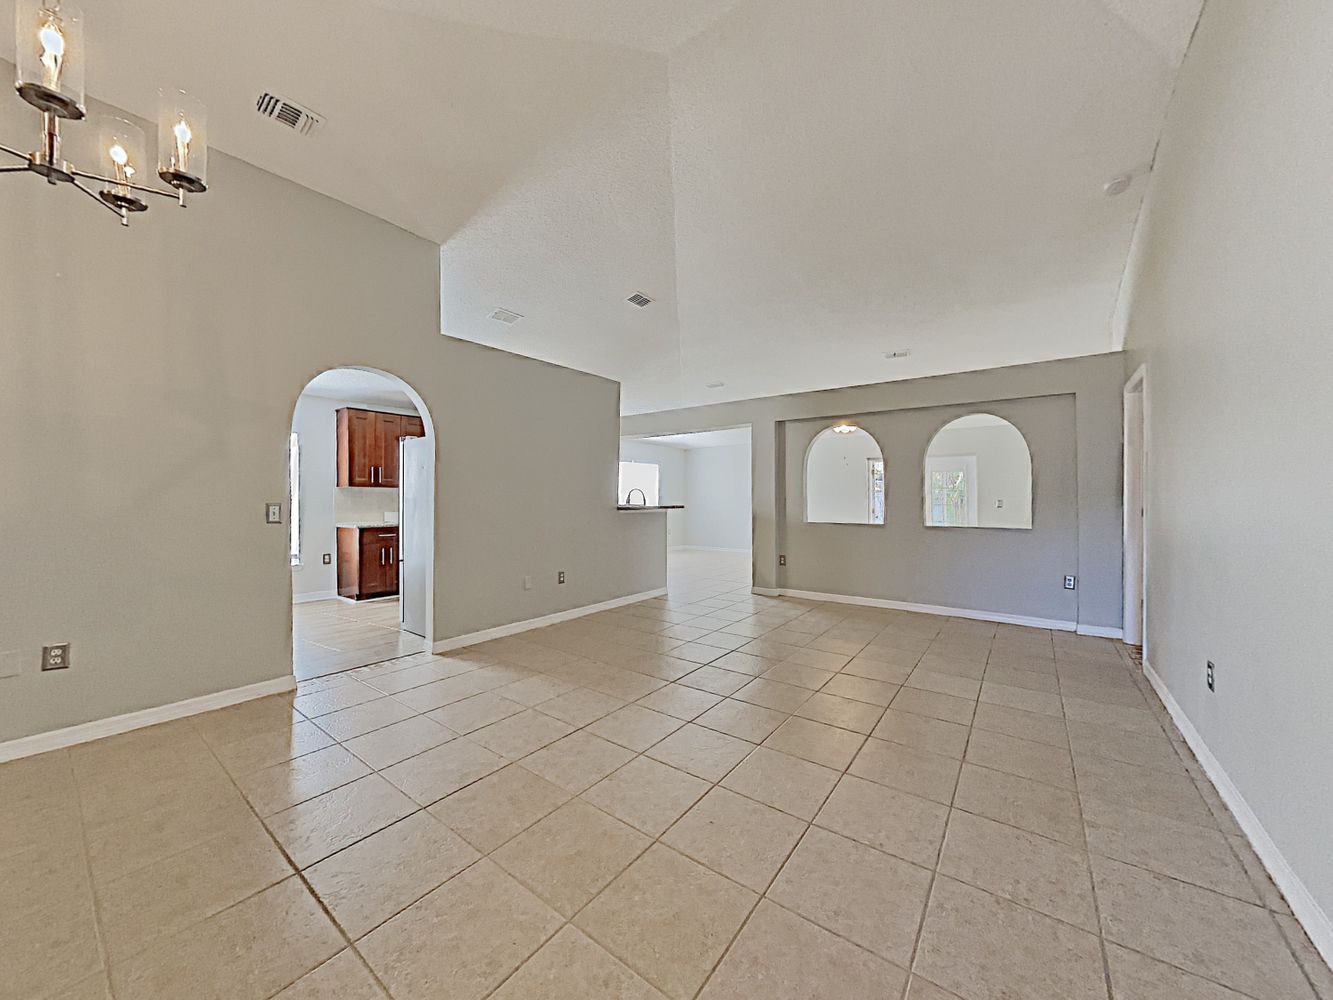 Spacious living space at Invitation Homes Jacksonville.